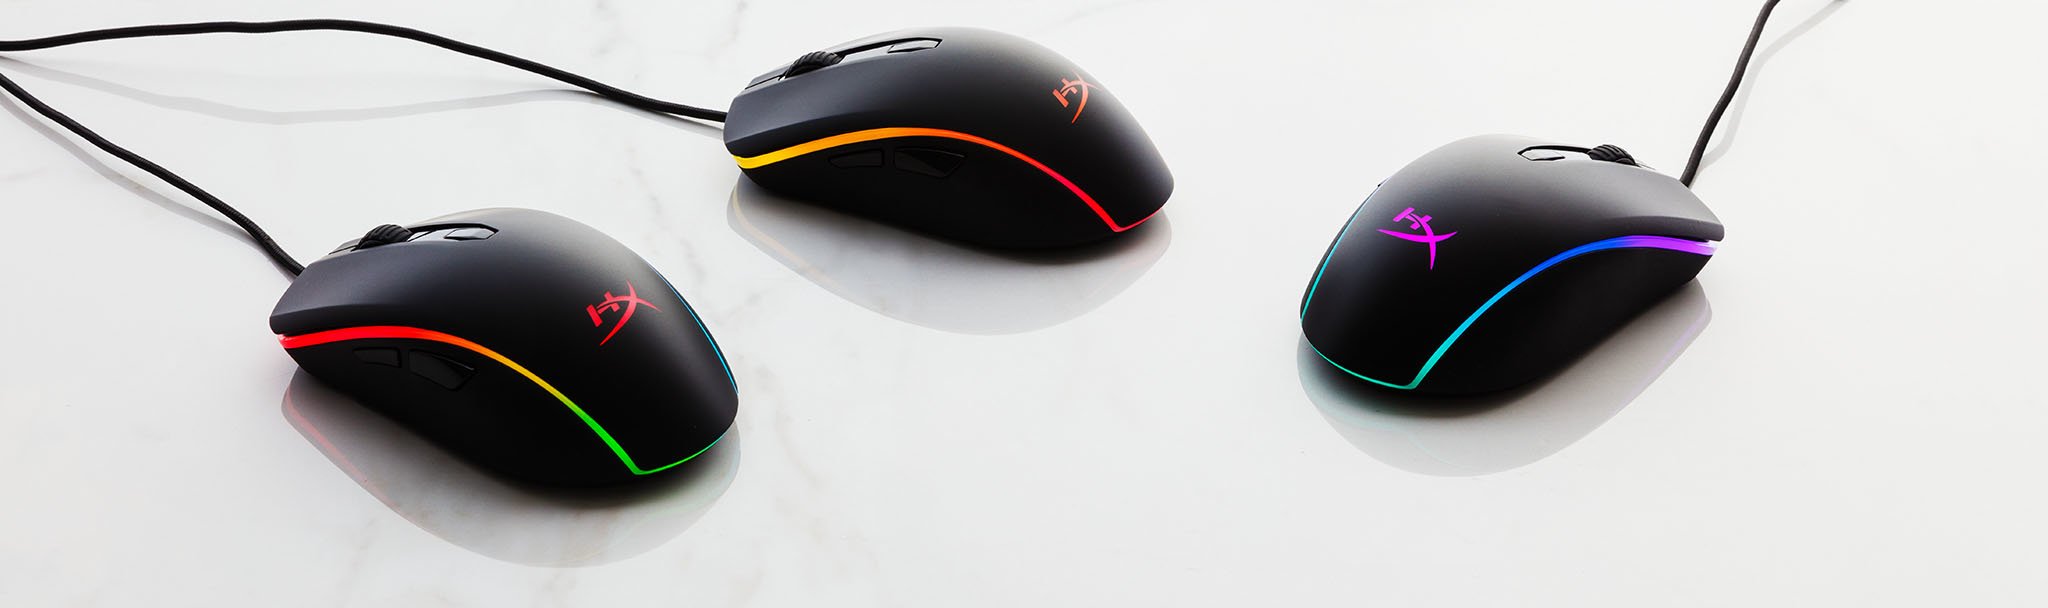 NEWS – HyperX Releases new Pulsefire Surge RGB gaming mouse